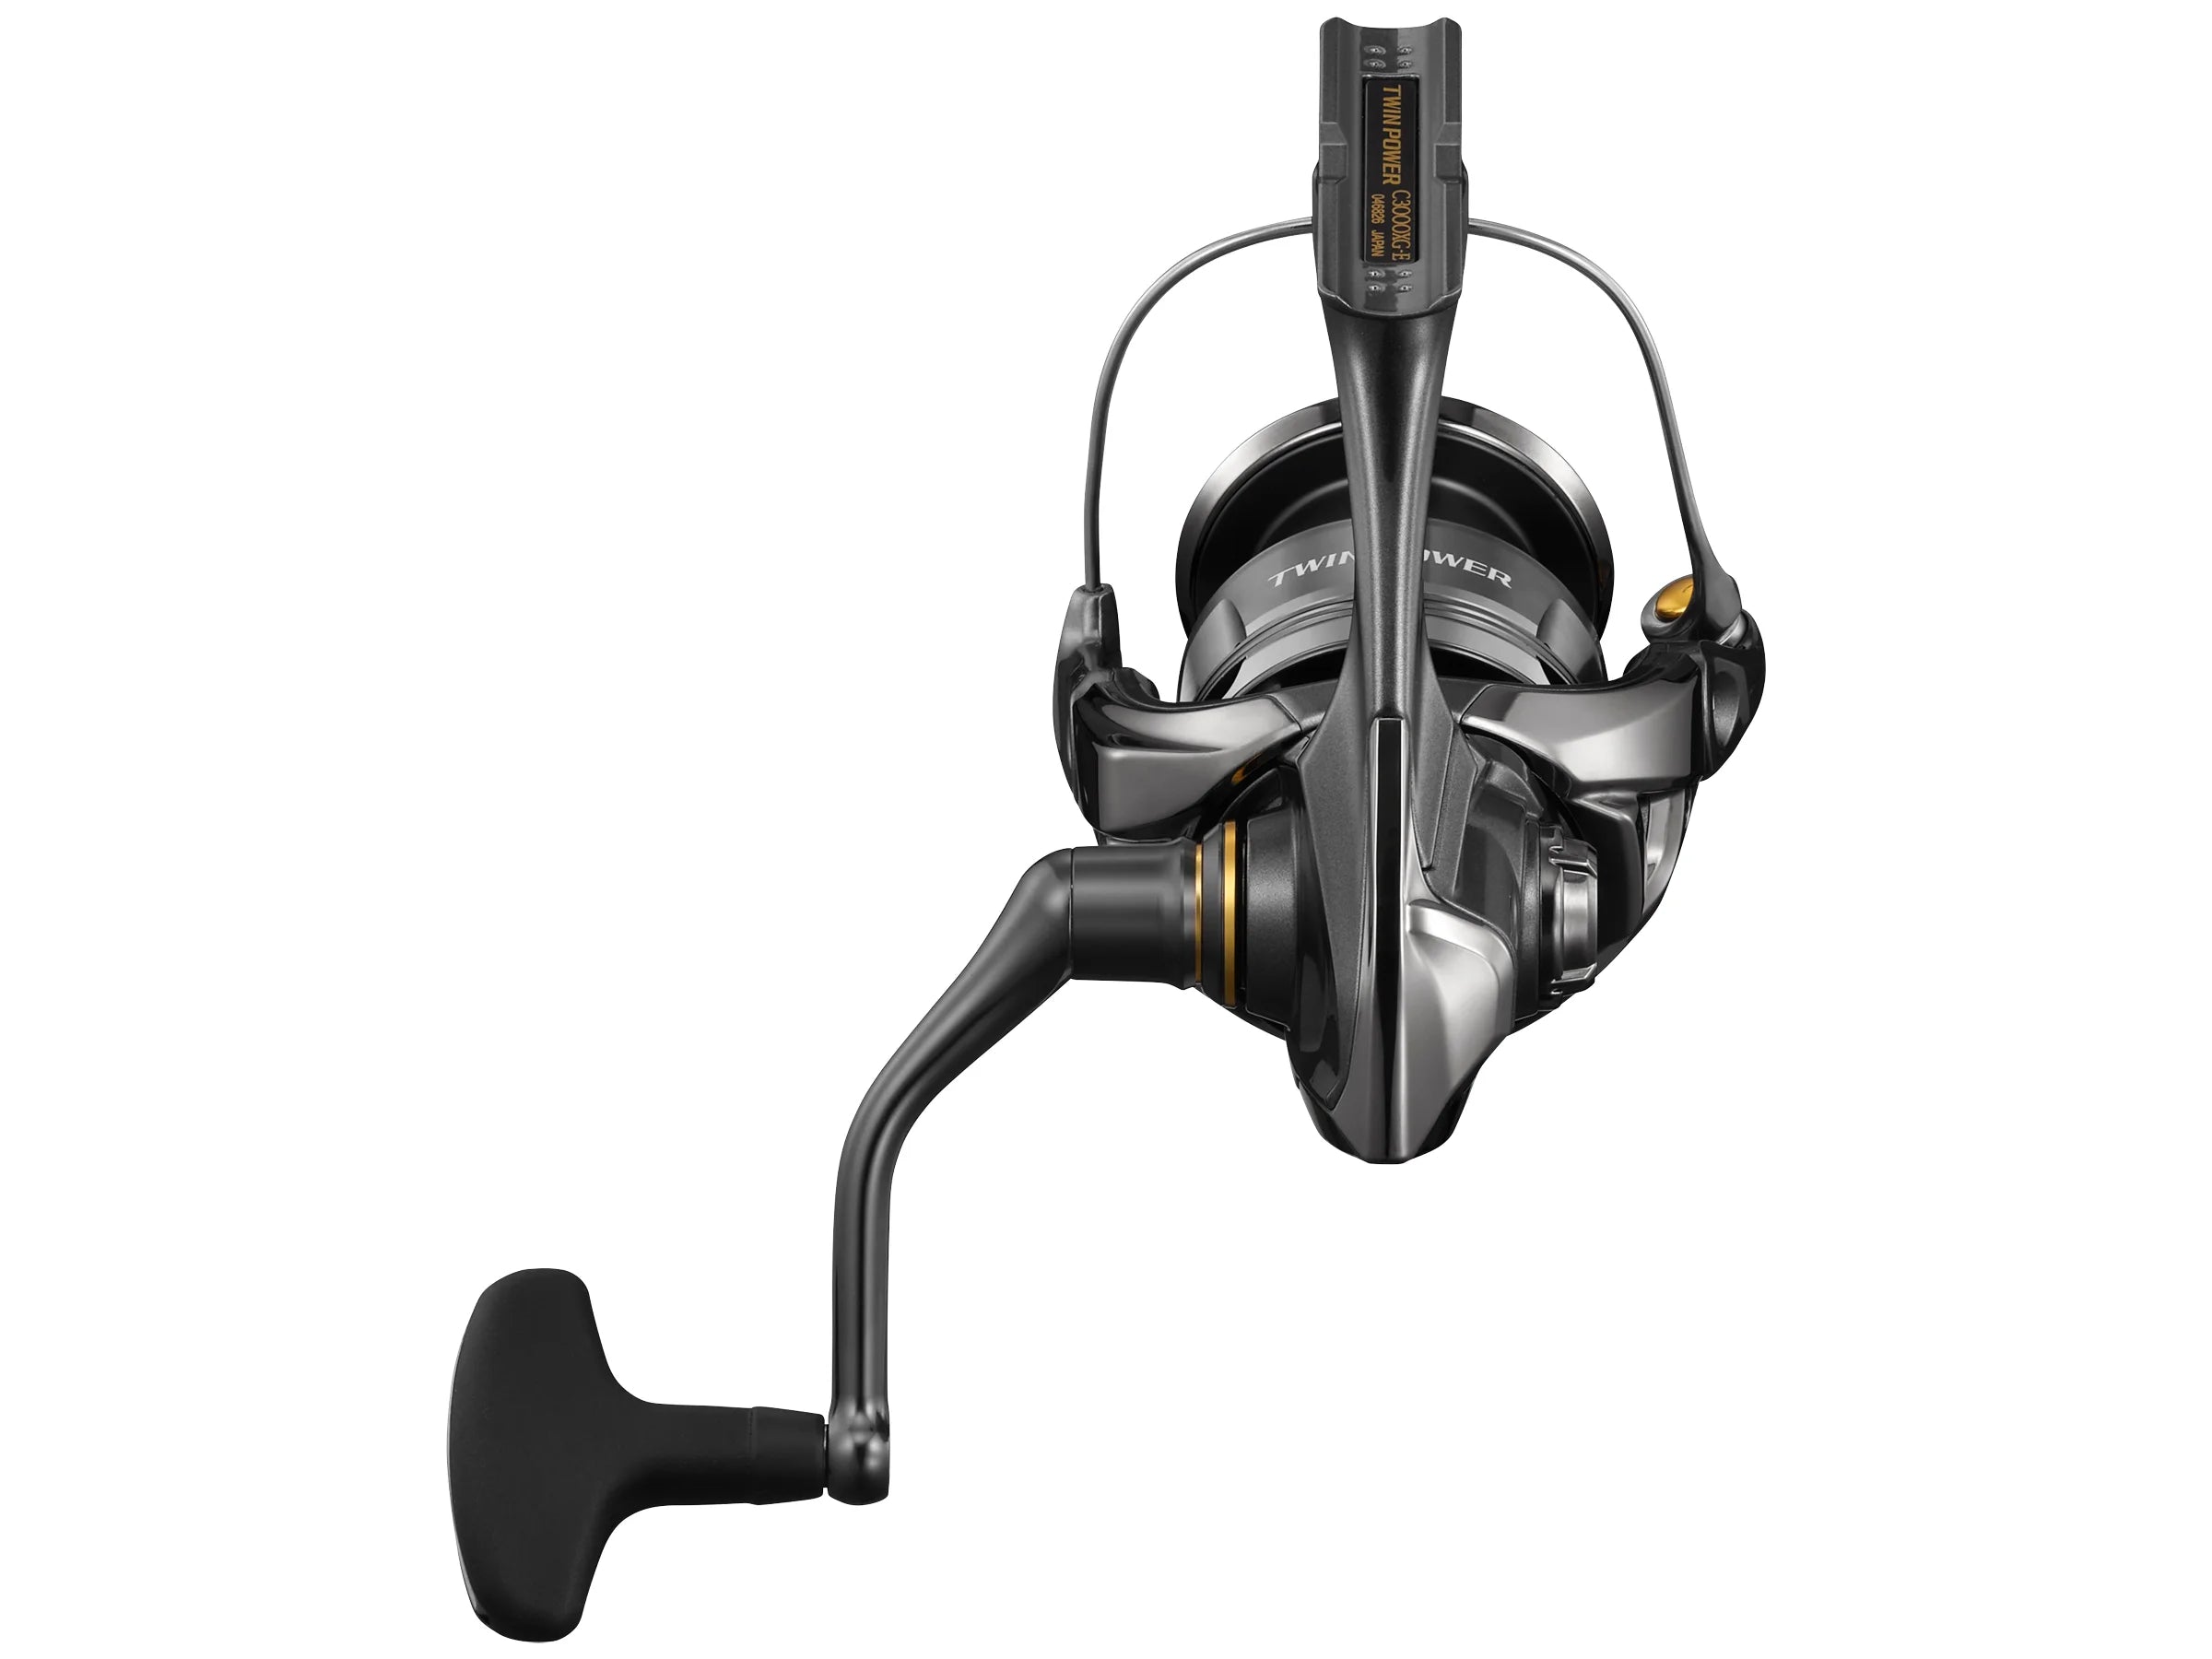 Shimano Twin Power FD Spinning Reels - Melton Tackle